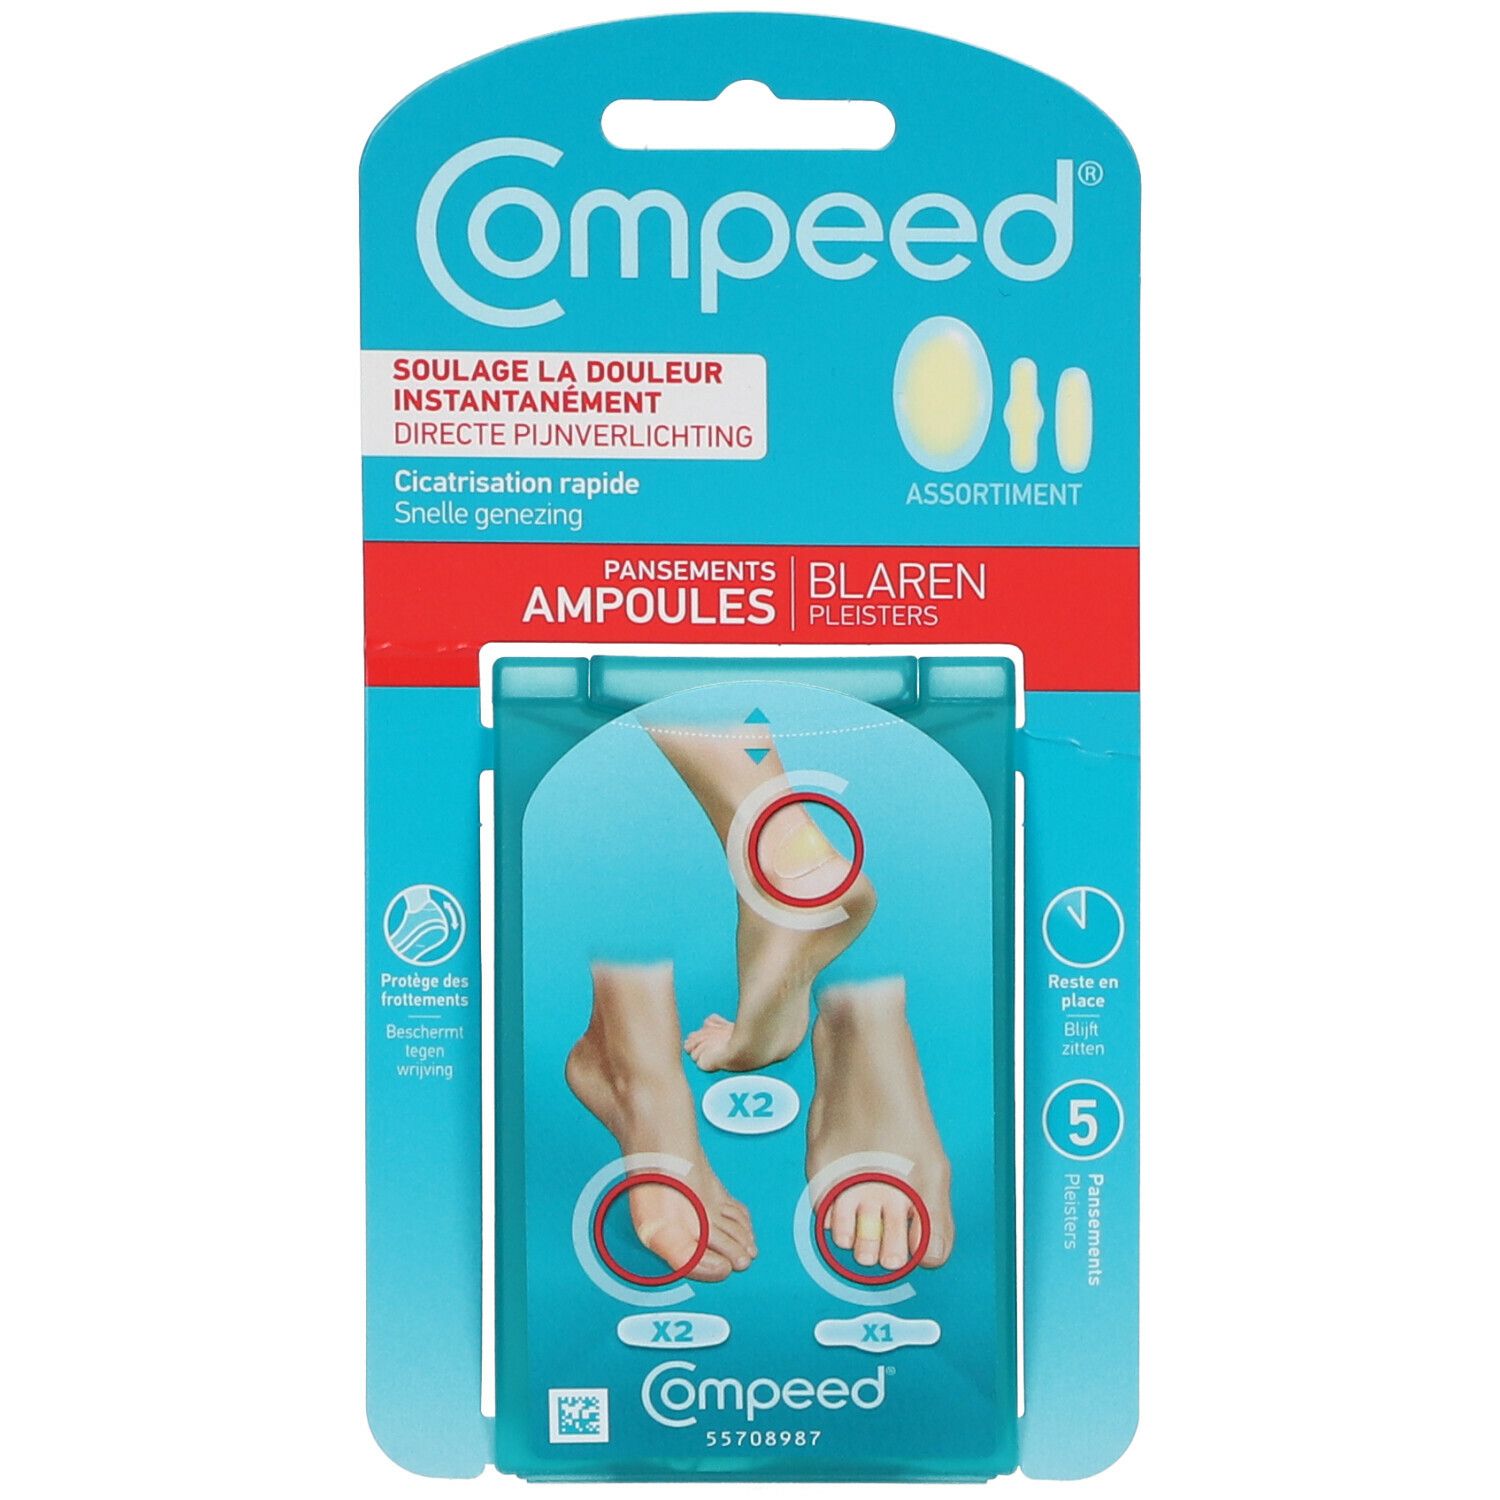 COMPEED 5 Pansements Ampoules Assortiment 3 Formats - 3574660720242